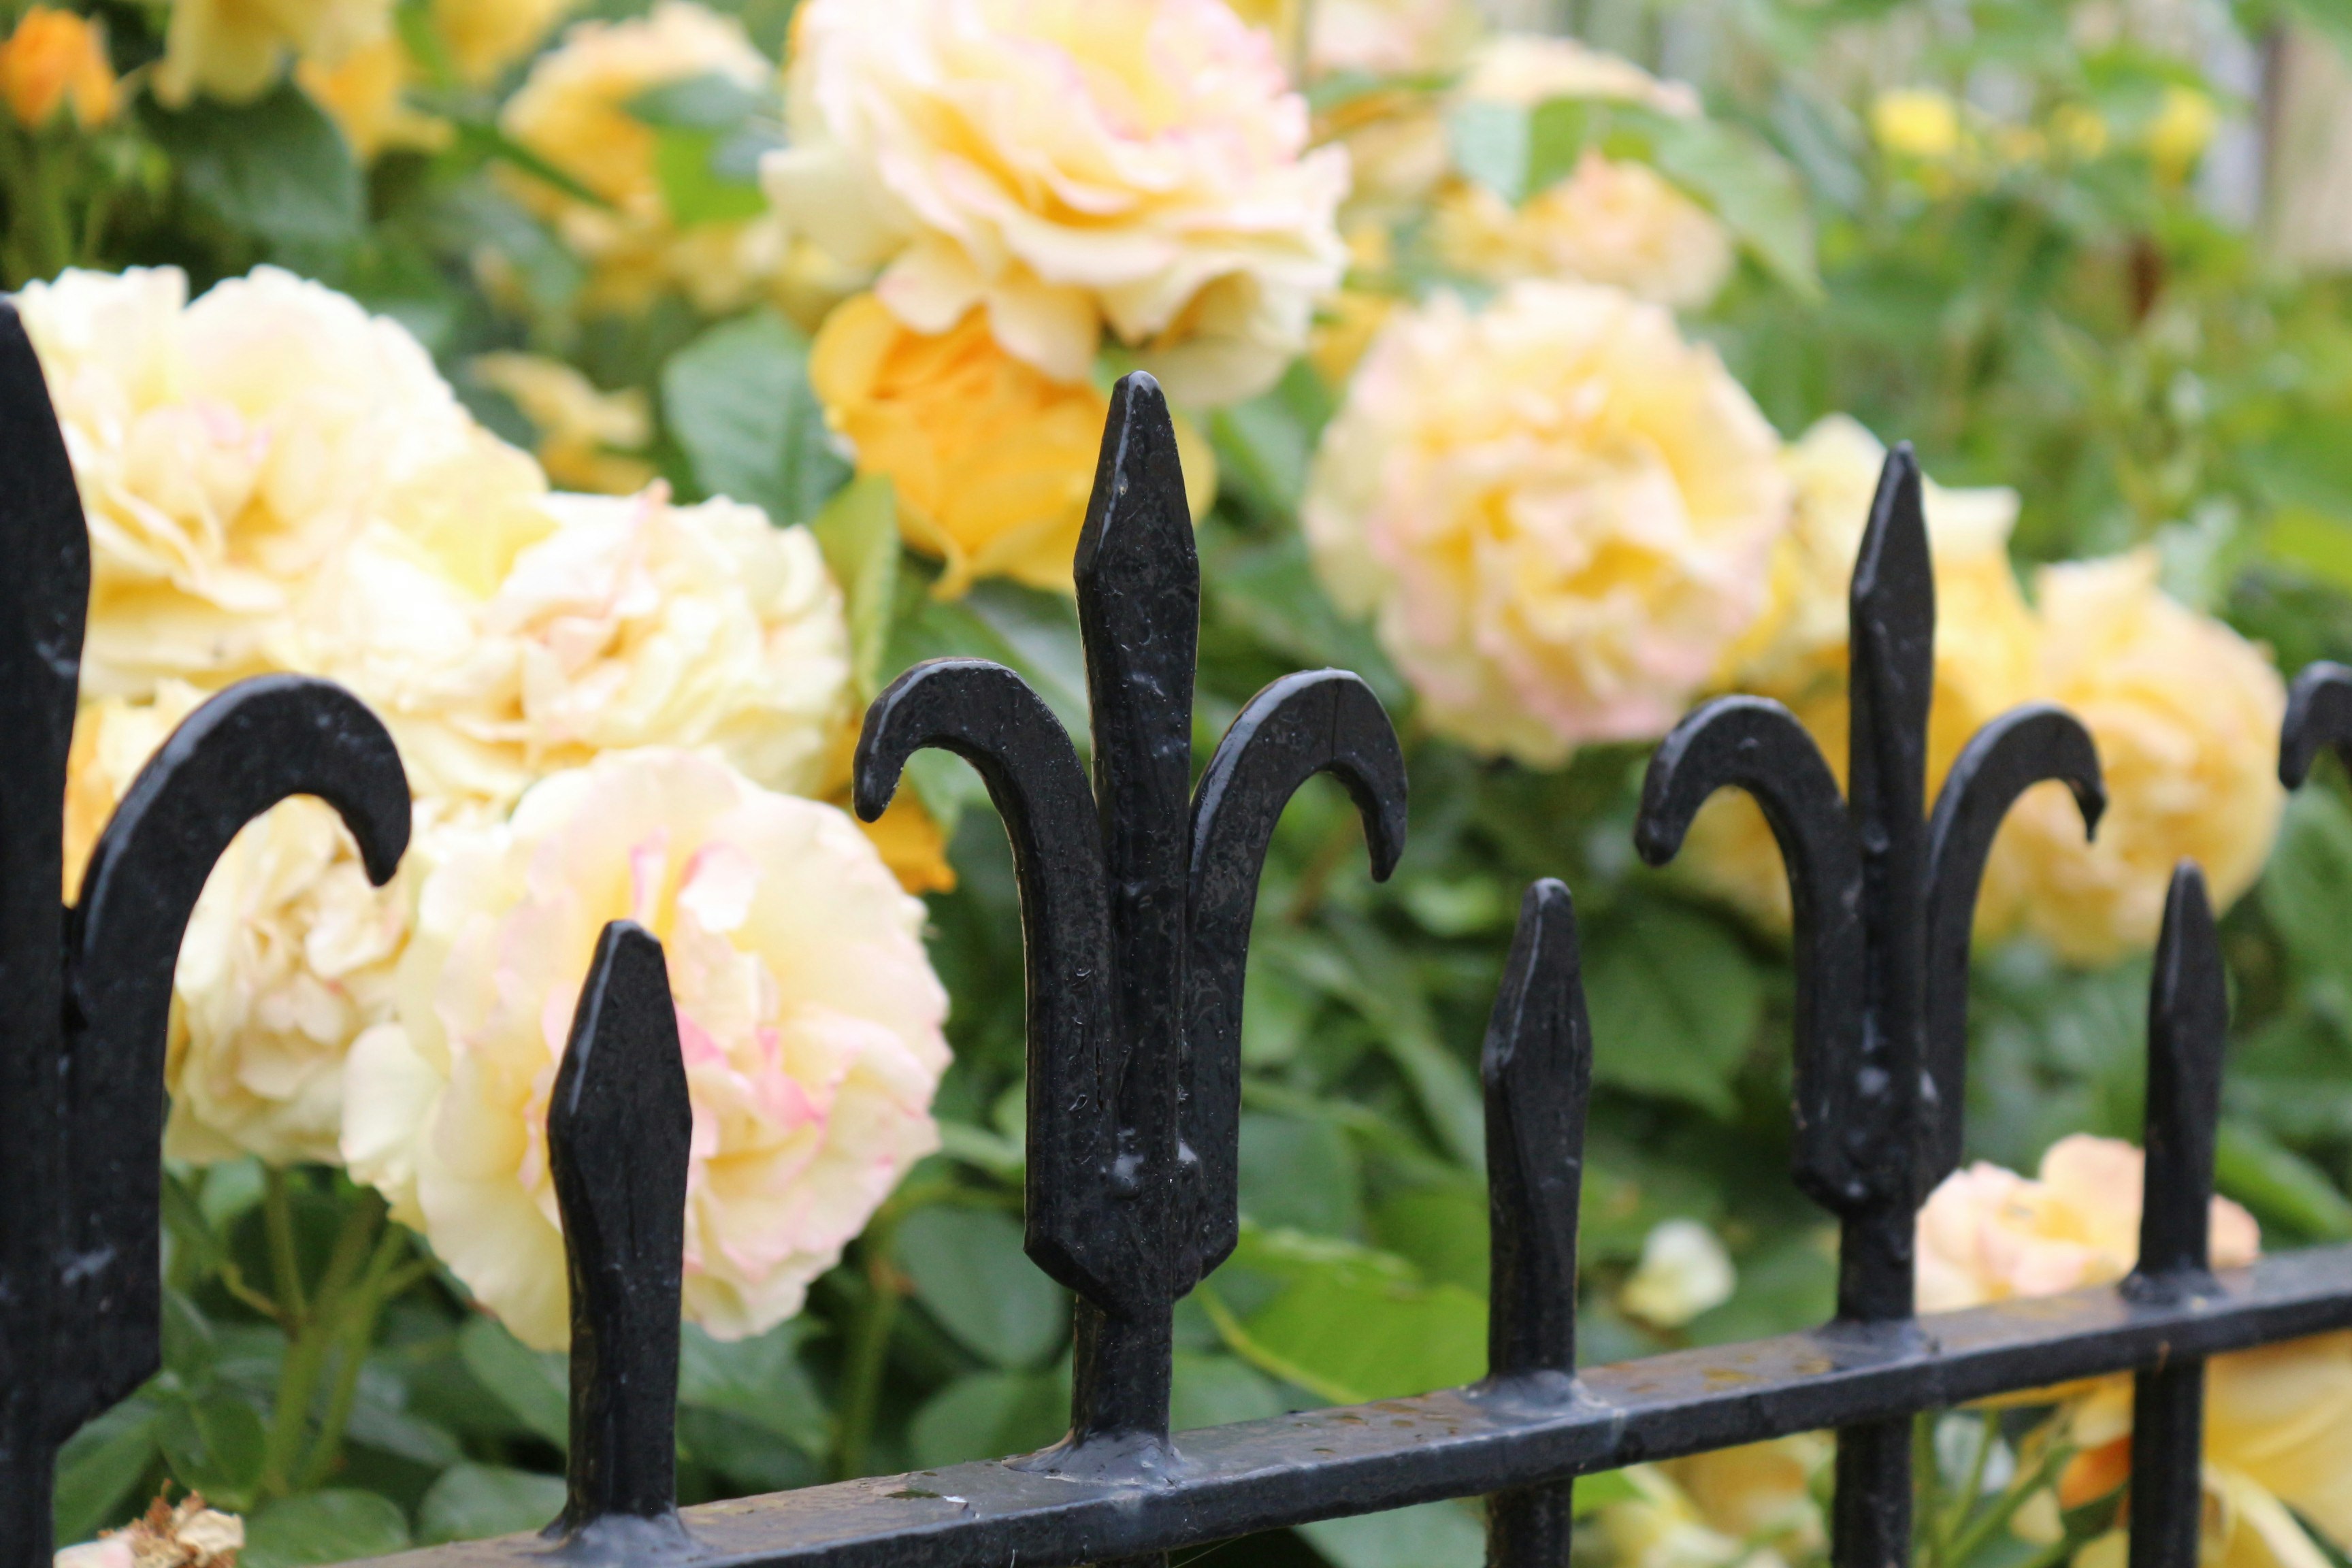 Decorative railings with beautiful yellow roses behind